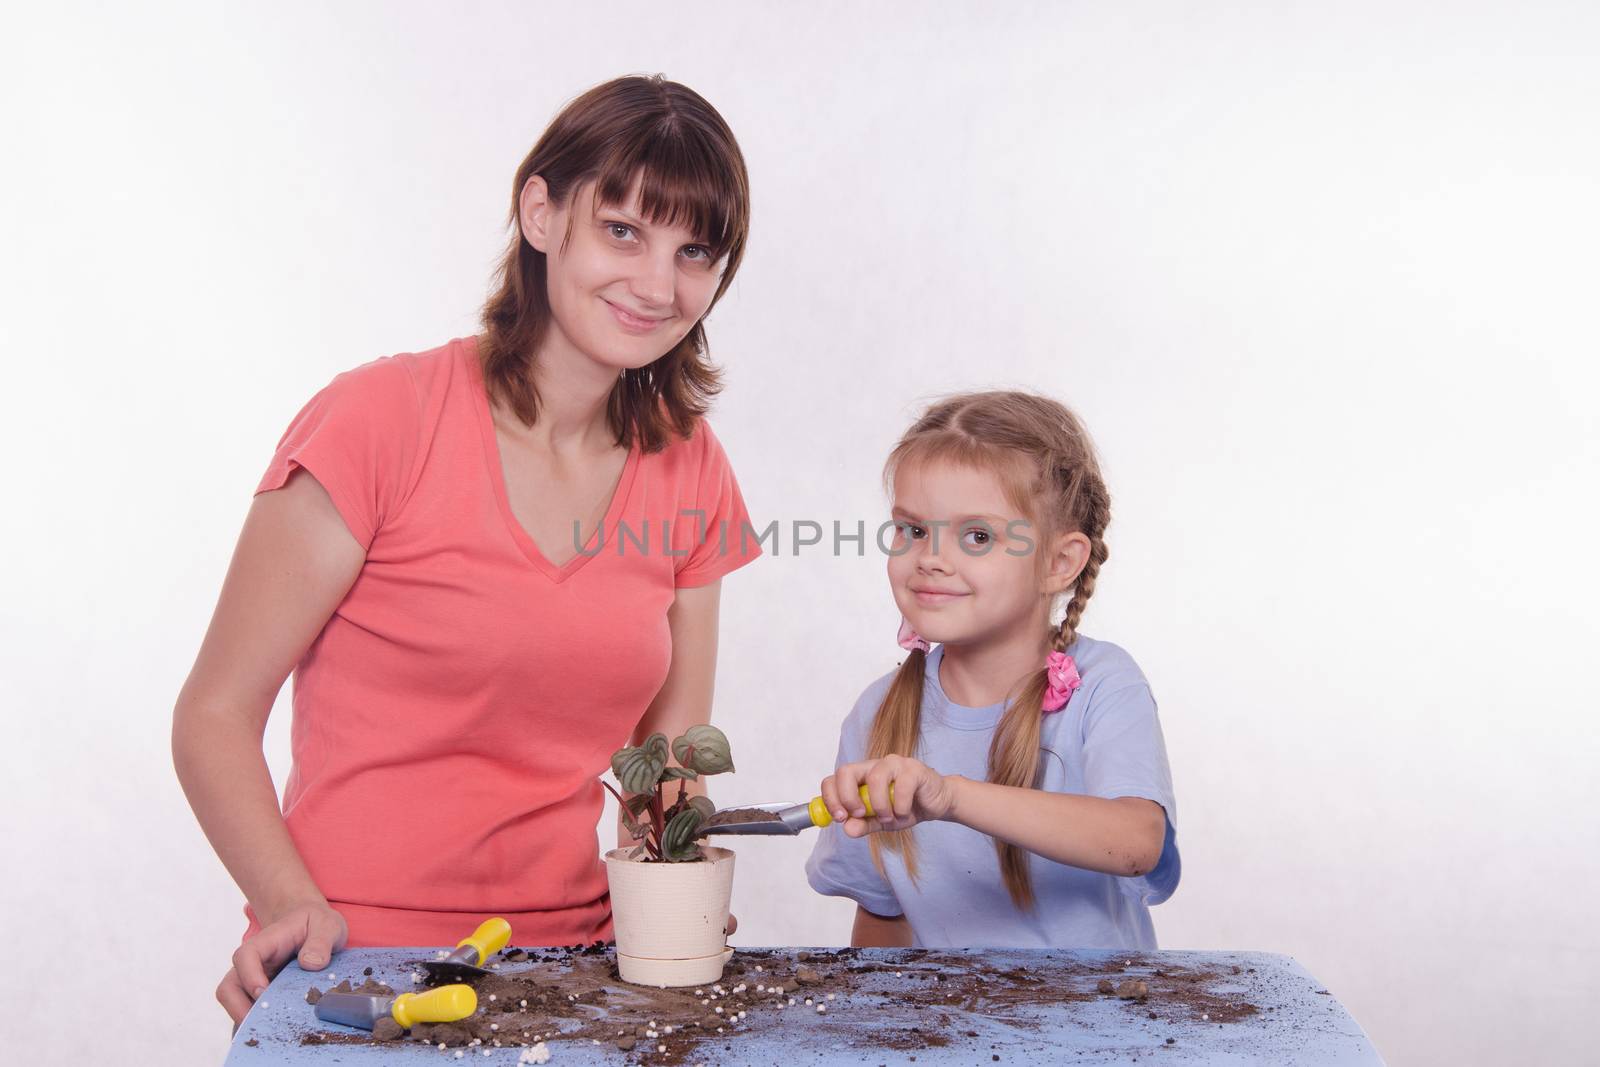 Daughter pours ground in a pot with potted flower by Madhourse